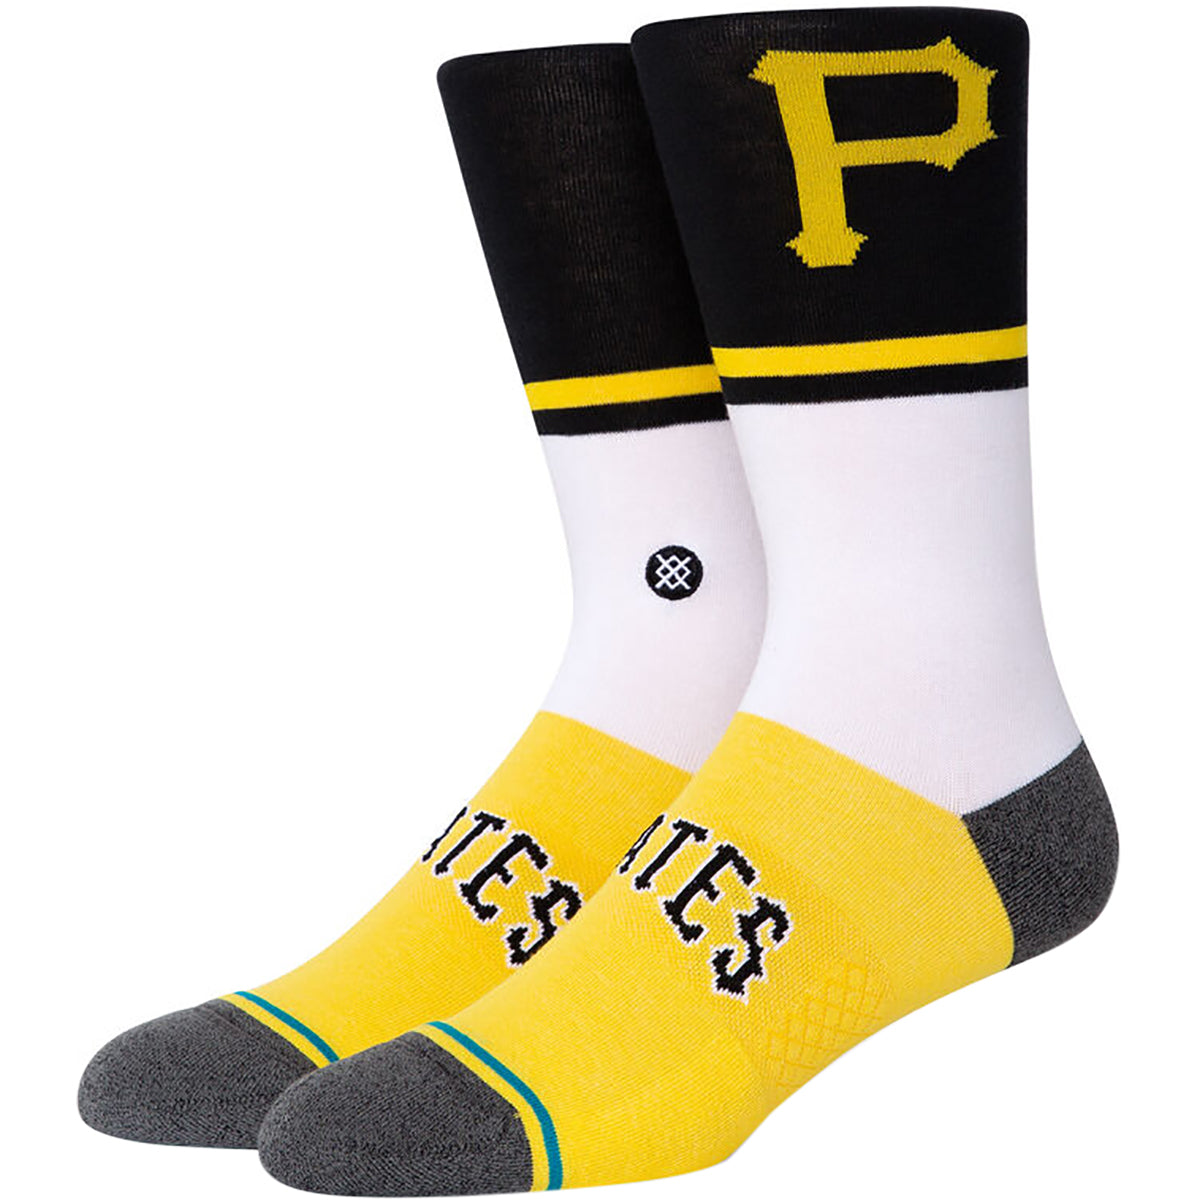 Pittsburgh Pirates on X: Proud to wear these colors.